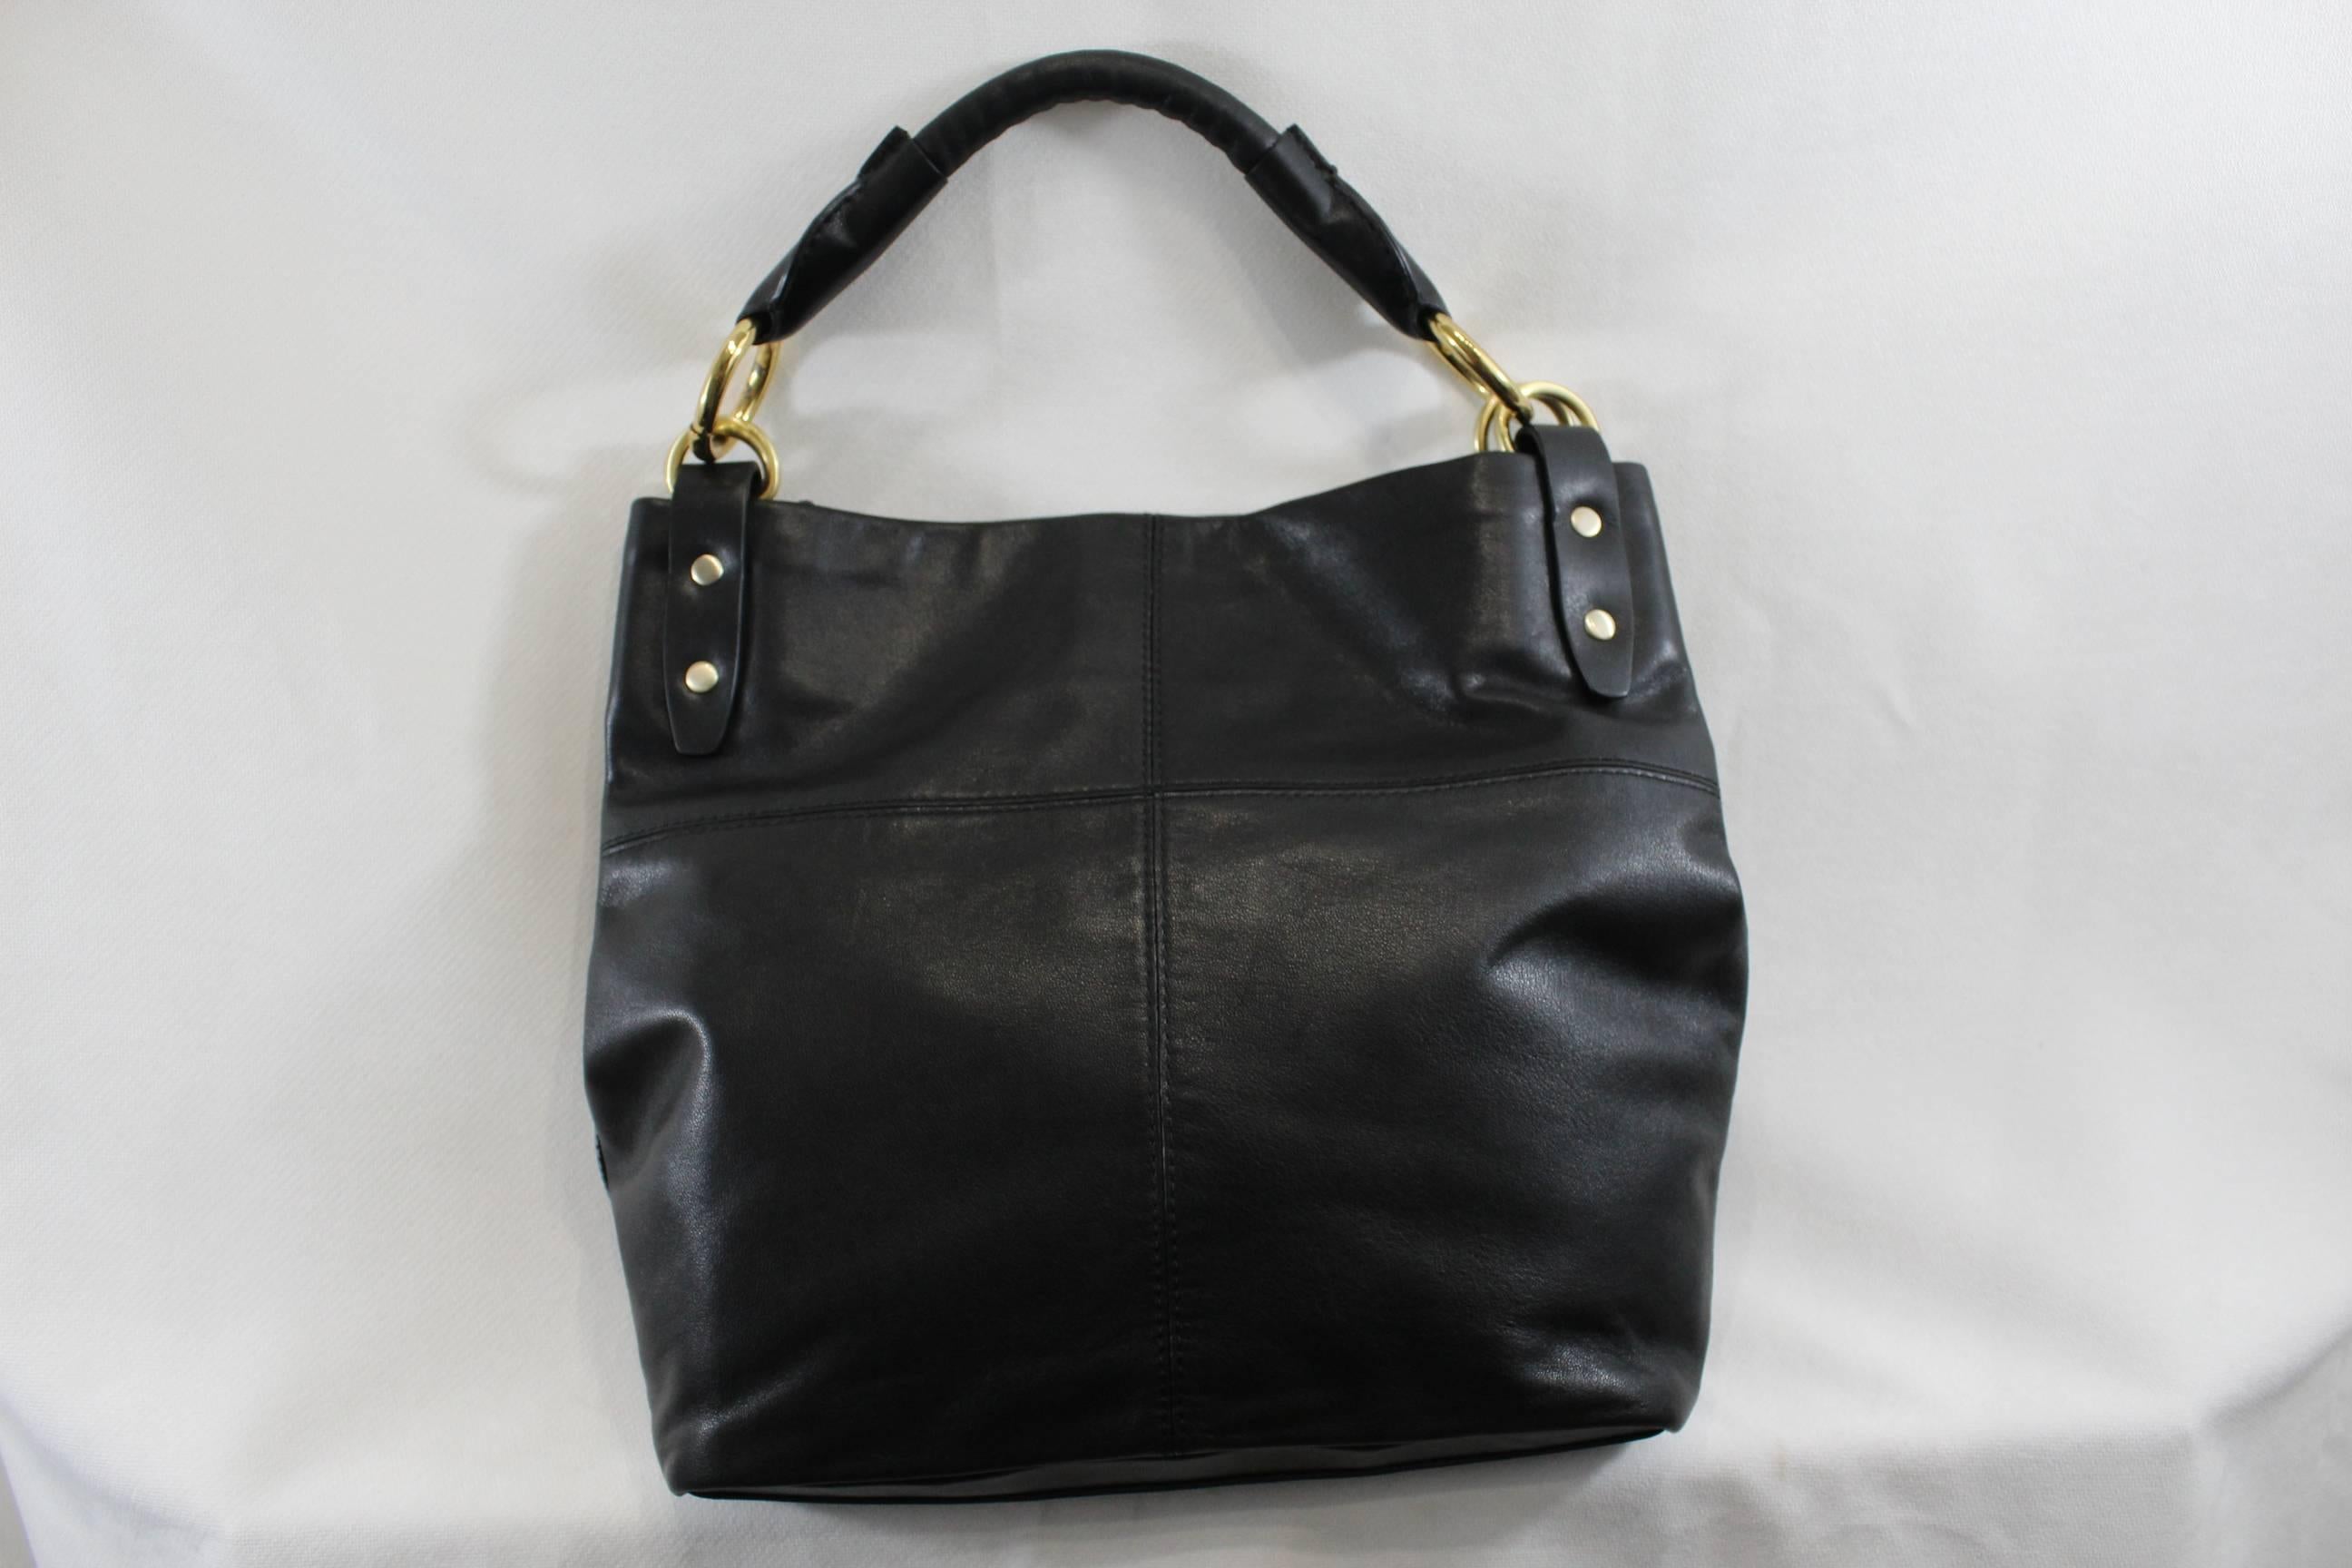 Nice Givenchy Shoulder bag with golden hardware.

leather in good condition
Clean interior
Hardware in good condition, some small signs of wear.
Size 12x11